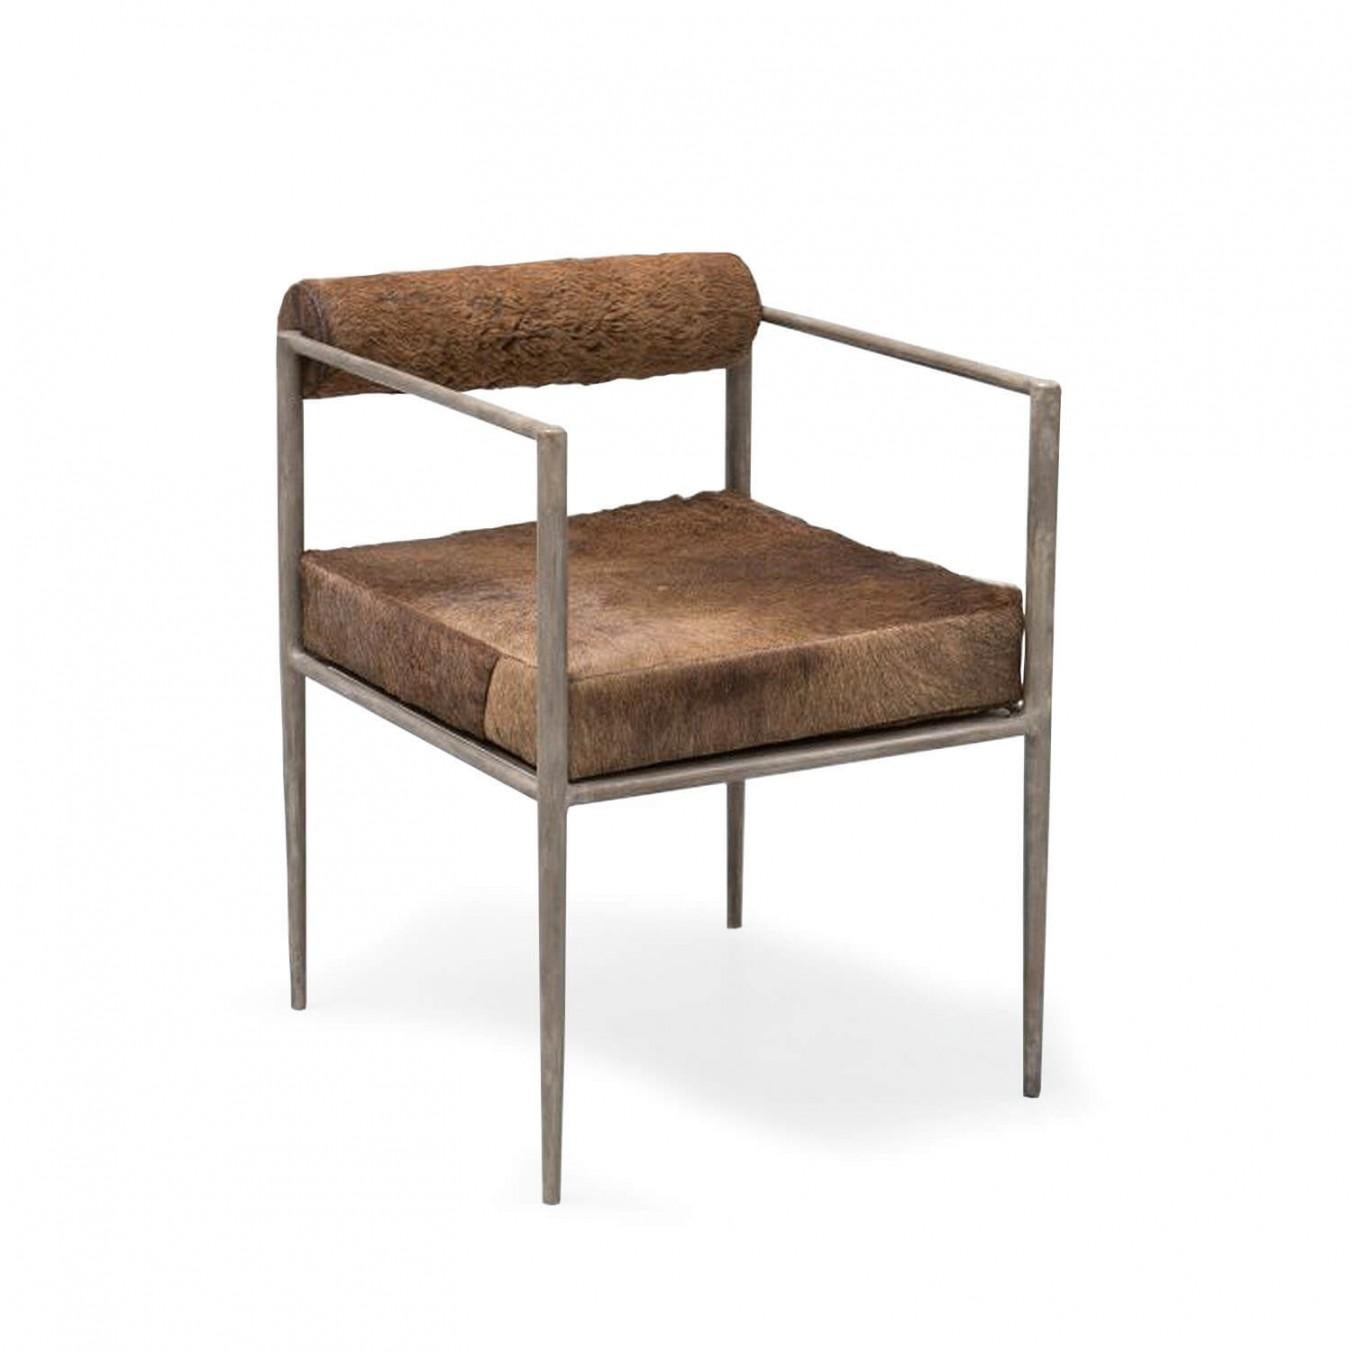 Contemporary camel upholstered chair - Square Alchemy chair by Rick Owens
2015
Dimensions: L 60 x W 60 x H 76 cm
Materials: Bronze, camel skin
Weight: 40 kg

Rick Owens is a California-born fashion and furniture has developed a unique style